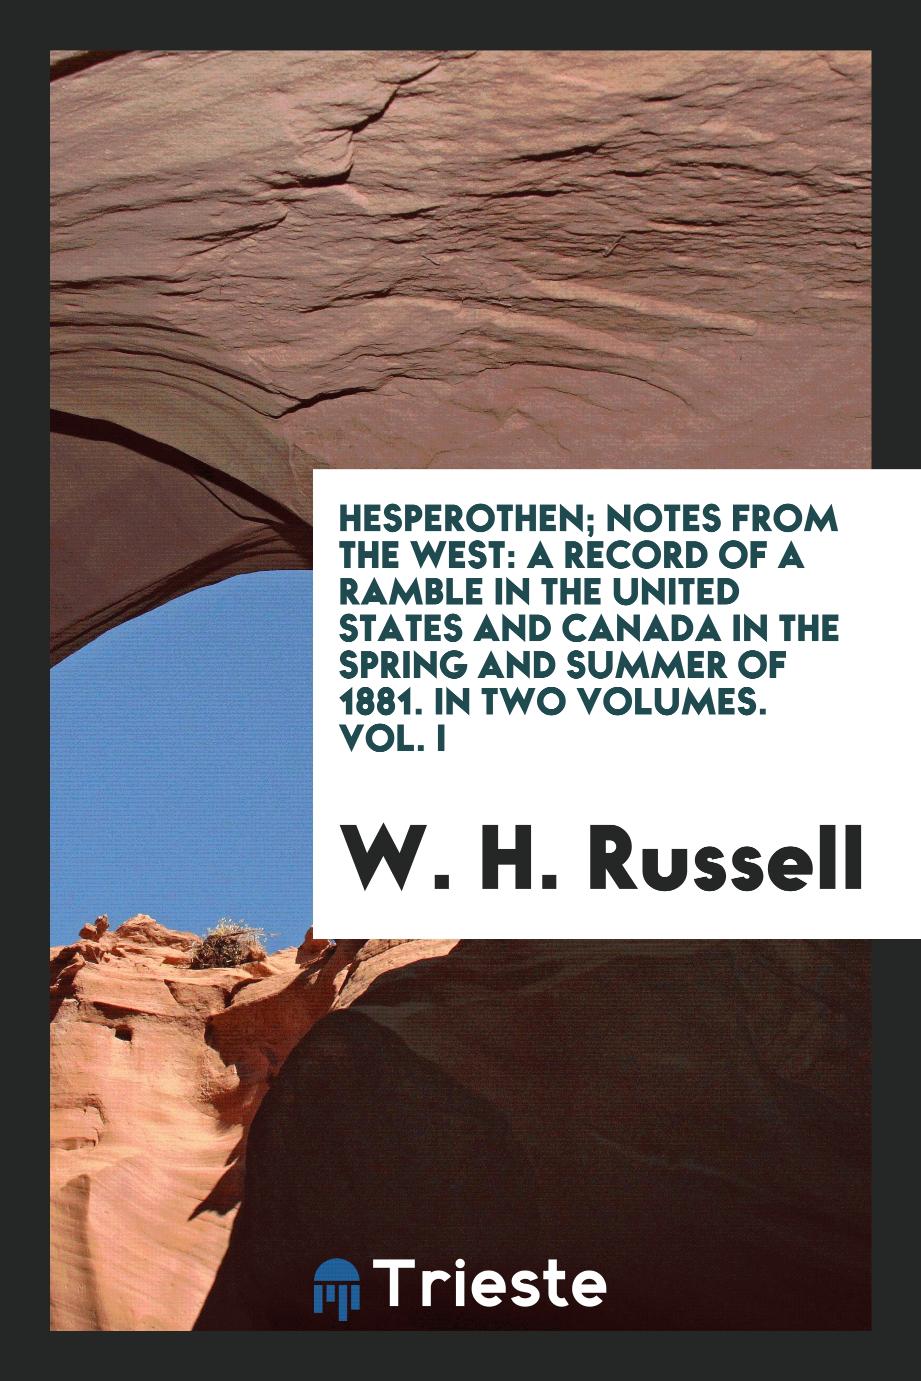 Hesperothen; Notes from the West: A Record of a Ramble in the United States and Canada in the Spring and Summer of 1881. In Two Volumes. Vol. I